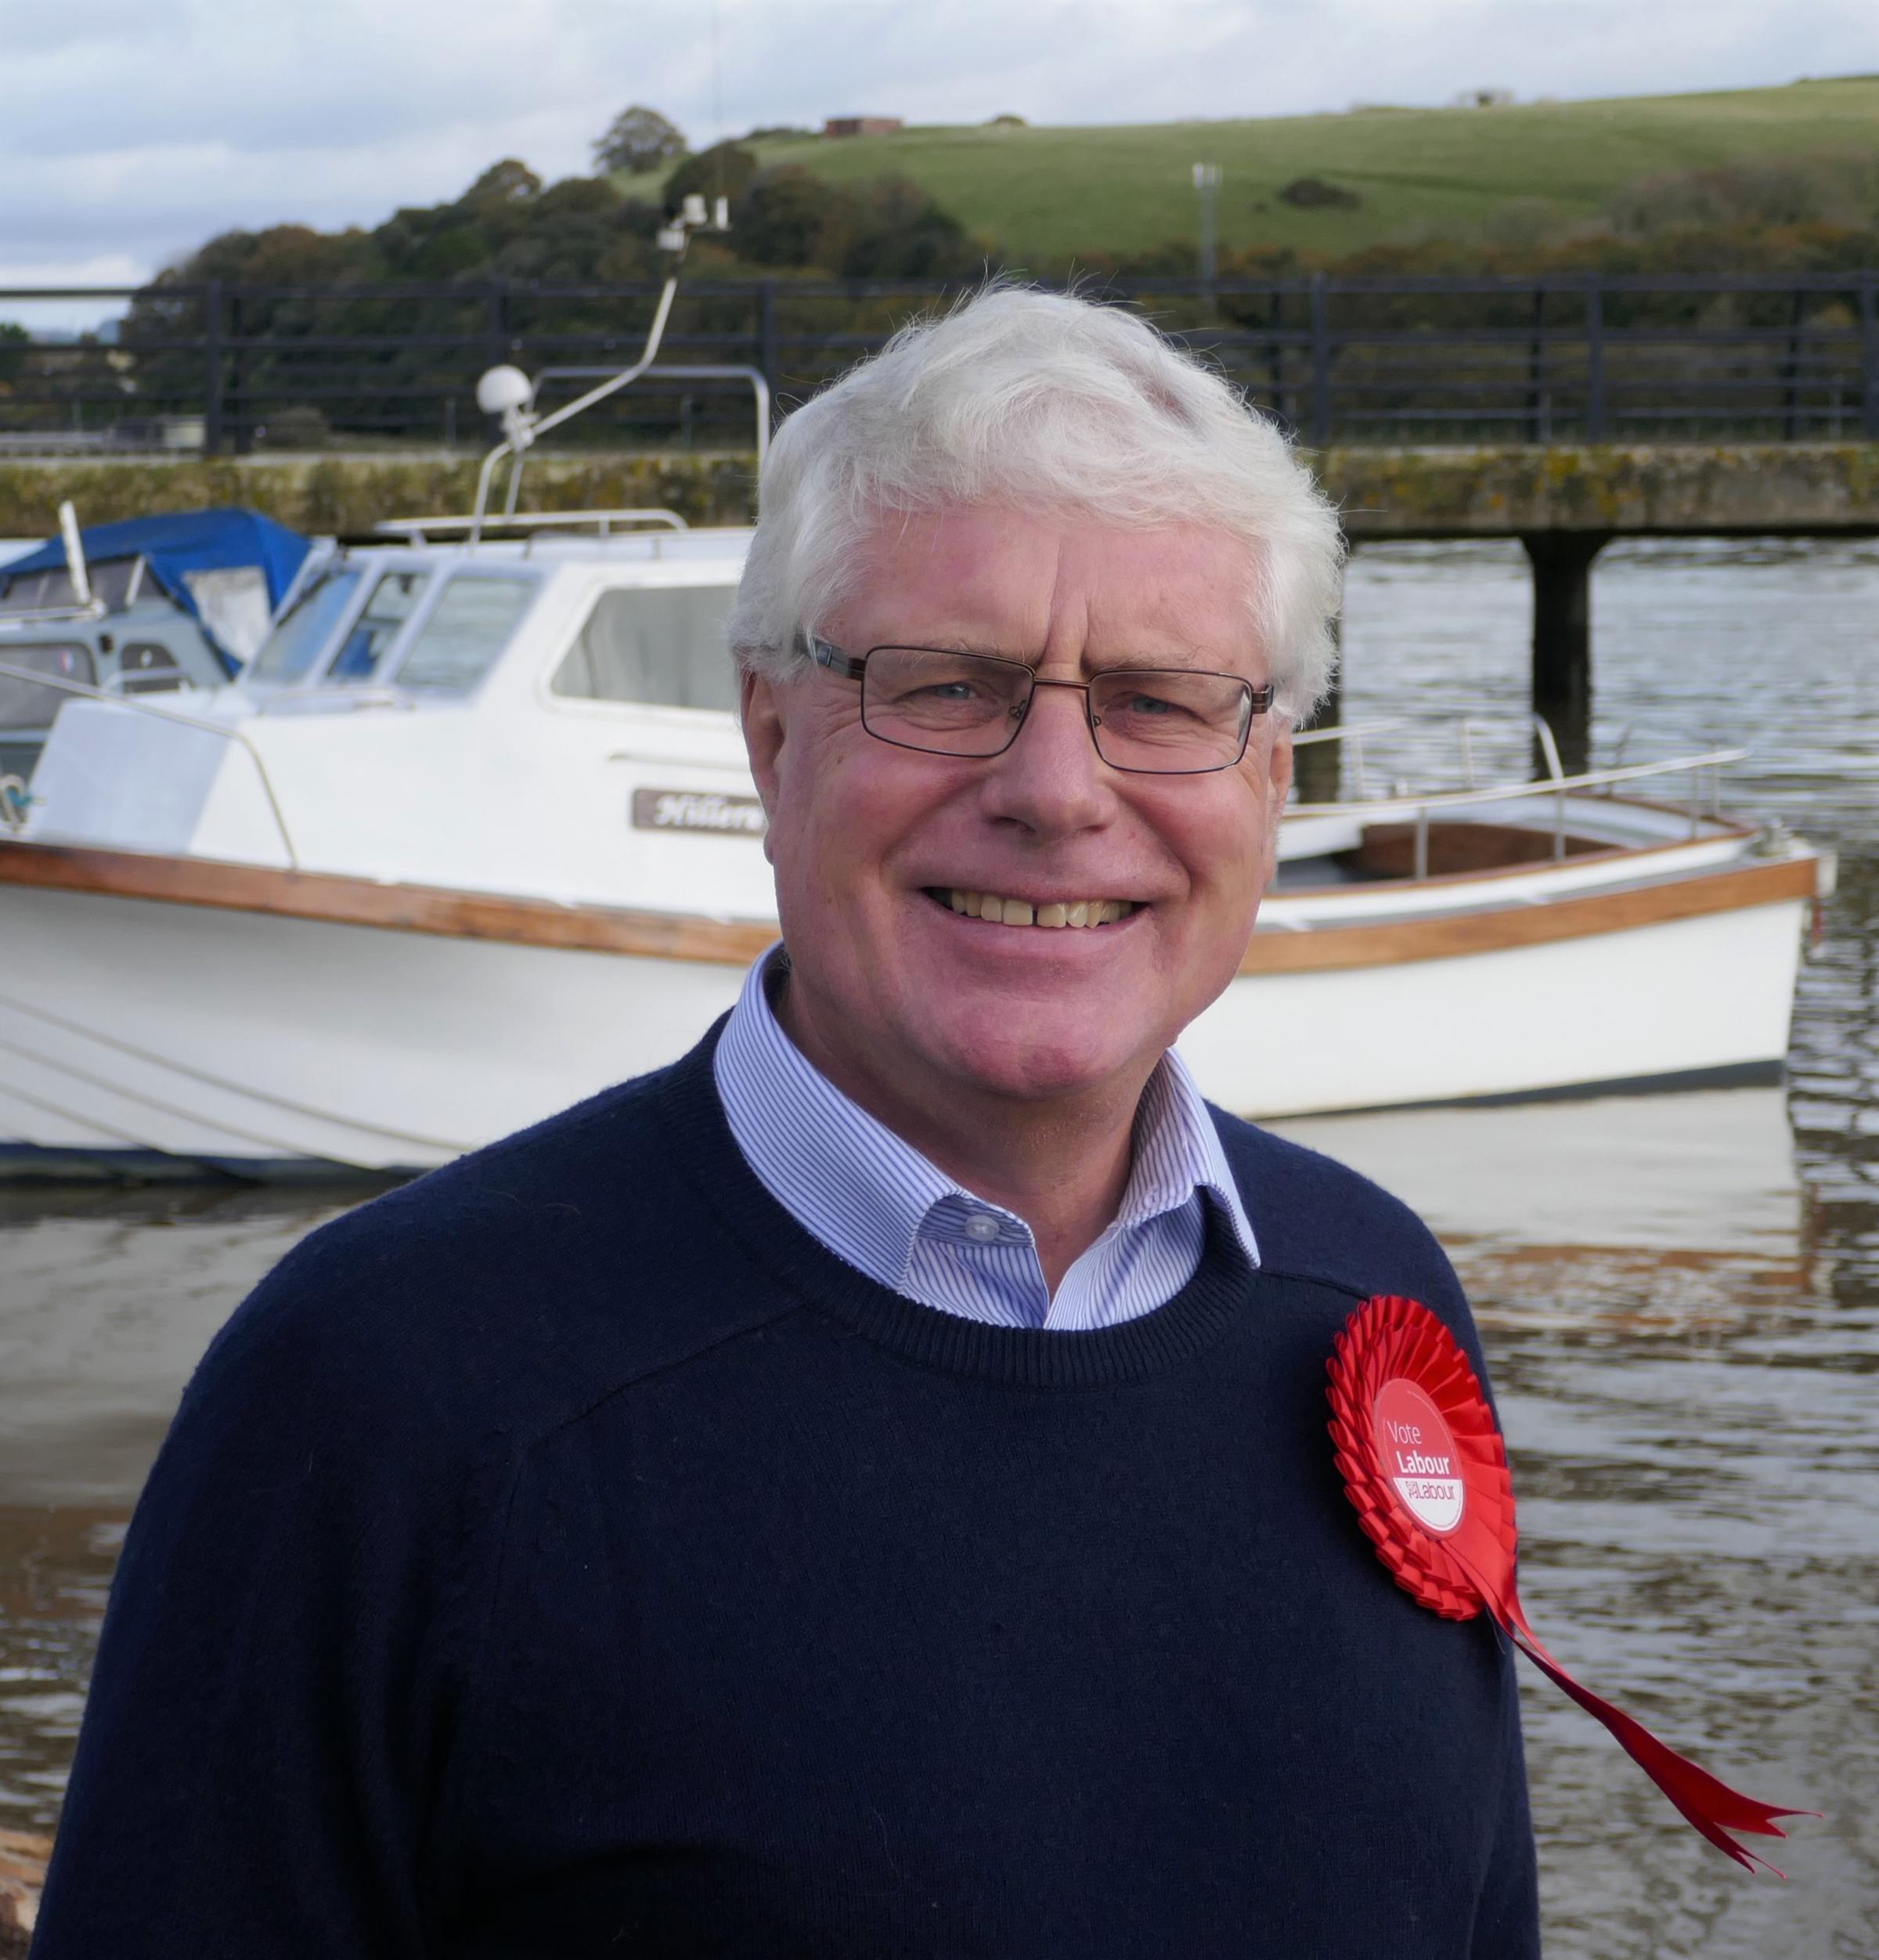 Gareth Derrick, Labour candidate for South East Cornwall